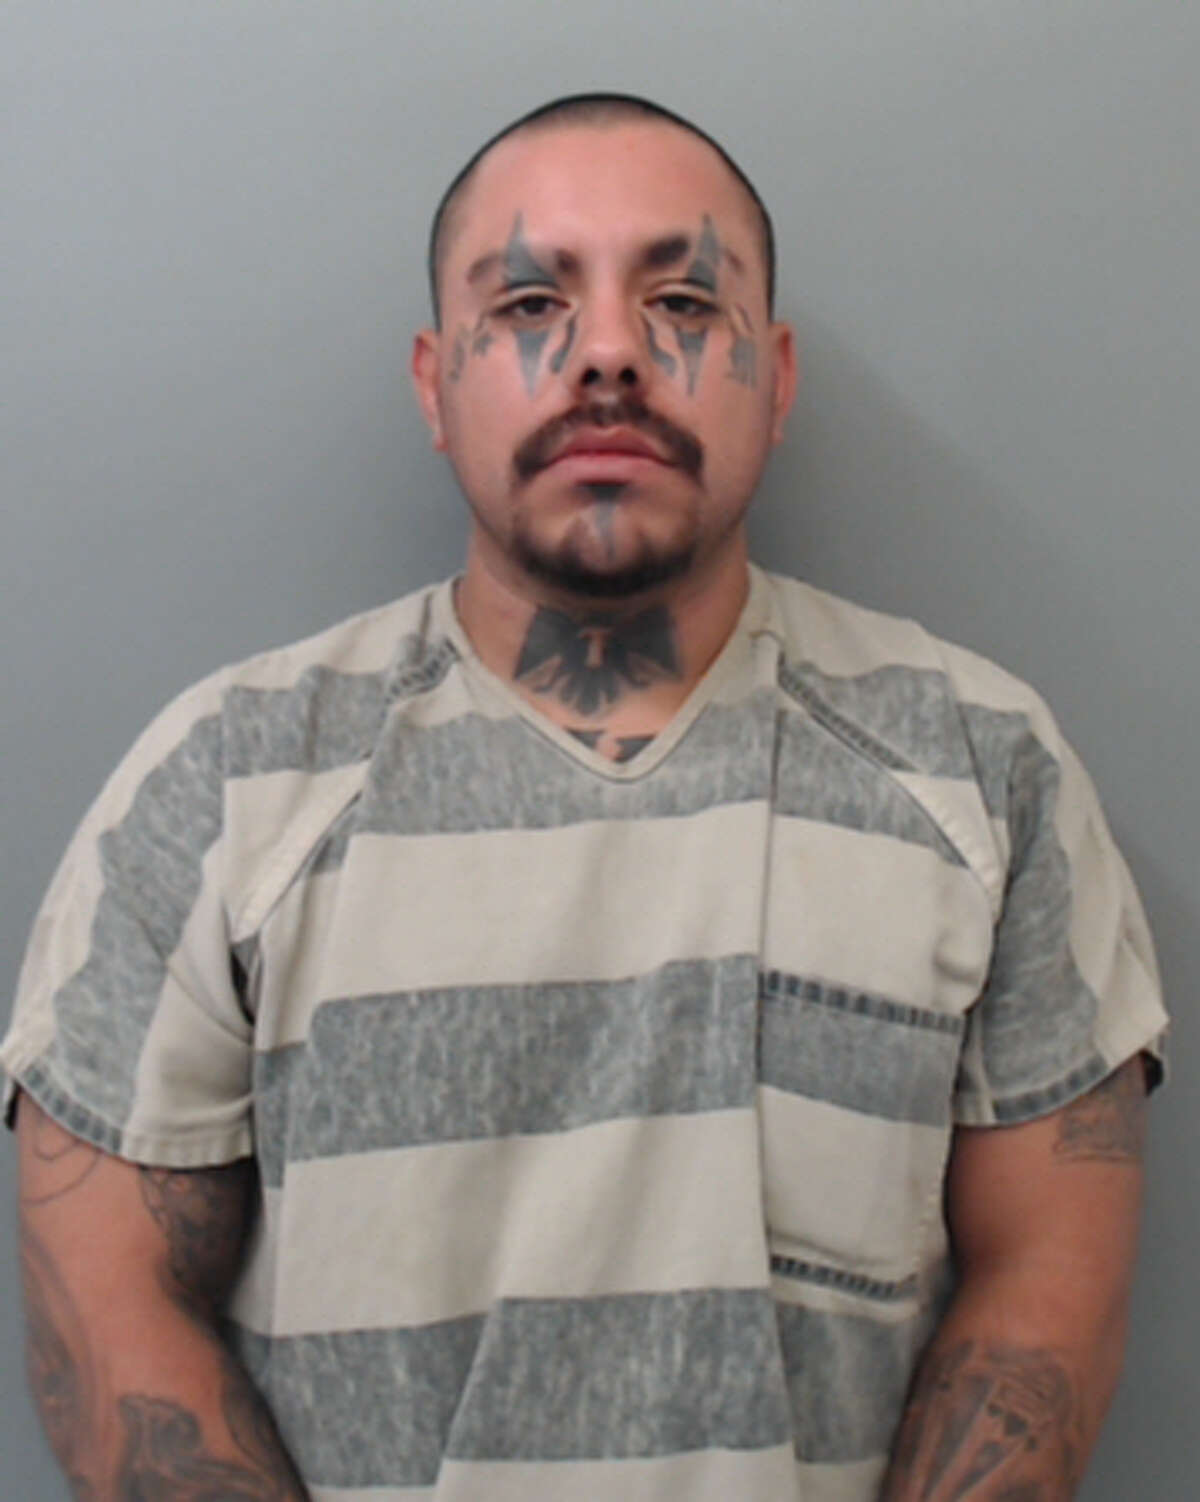 Esteban Lerma, 28, was arrested and charged with two counts of assault.